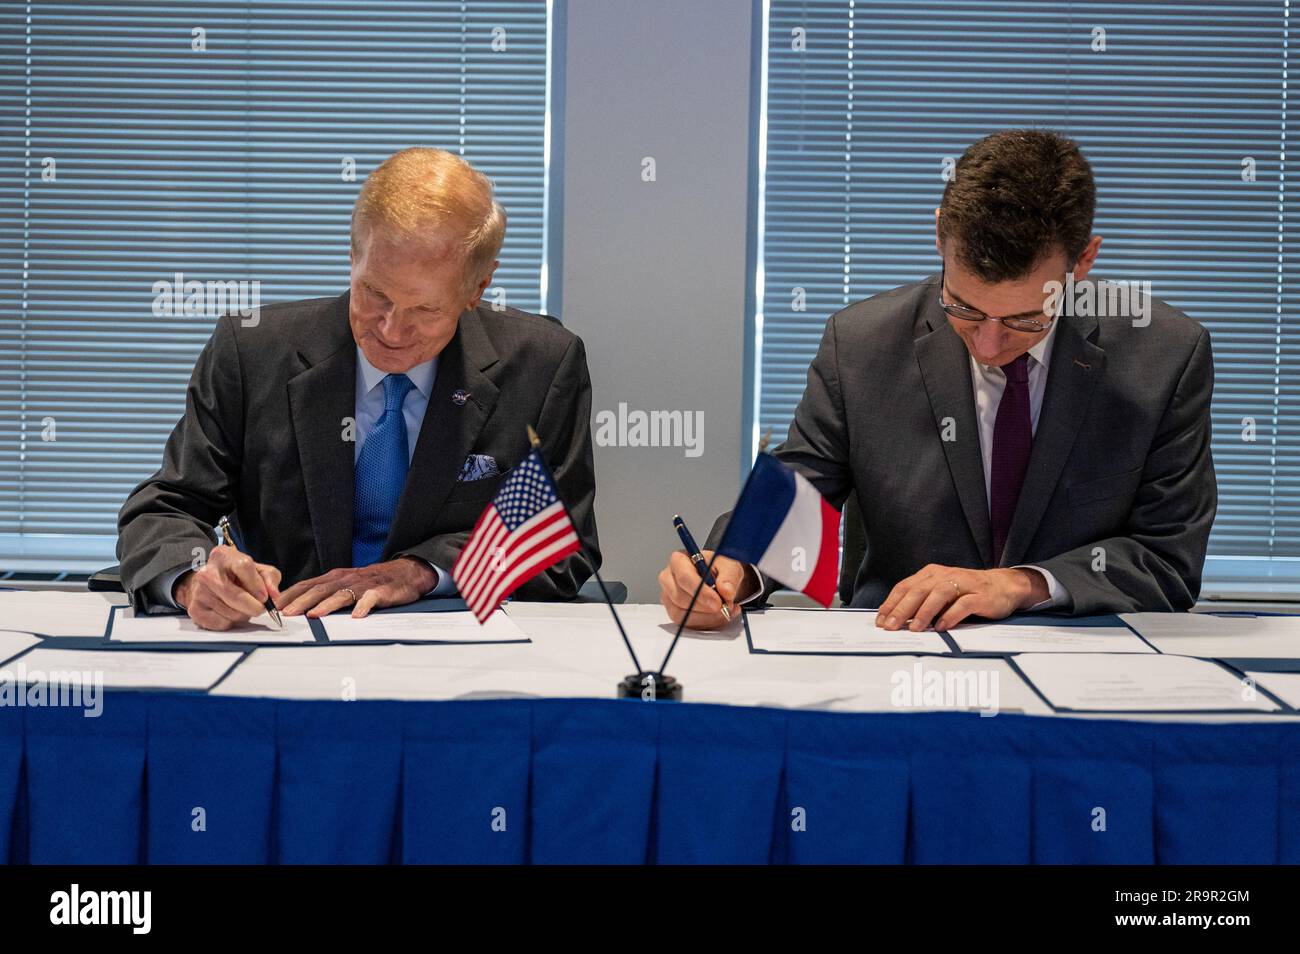 Vice President Harris and French President Macron meet at NASA HQ. NASA Administrator Bill Nelson and President of the Centre National d’Etudes Spatiales (CNES) Dr. Philippe Baptiste sign an agreement for the Farside Seismic Suite (FSS), Wednesday, Nov. 30, 2022 at the Mary W. Jackson NASA Headquarters building in Washington. The FSS will return the first lunar seismic data from the far side of the Moon. CNES is contributing one of the seismometers to this payload, which will be delivered via NASA’s Commercial Lunar Payloads Services (CLPS) initiative, based on heritage capabilities from the M Stock Photo